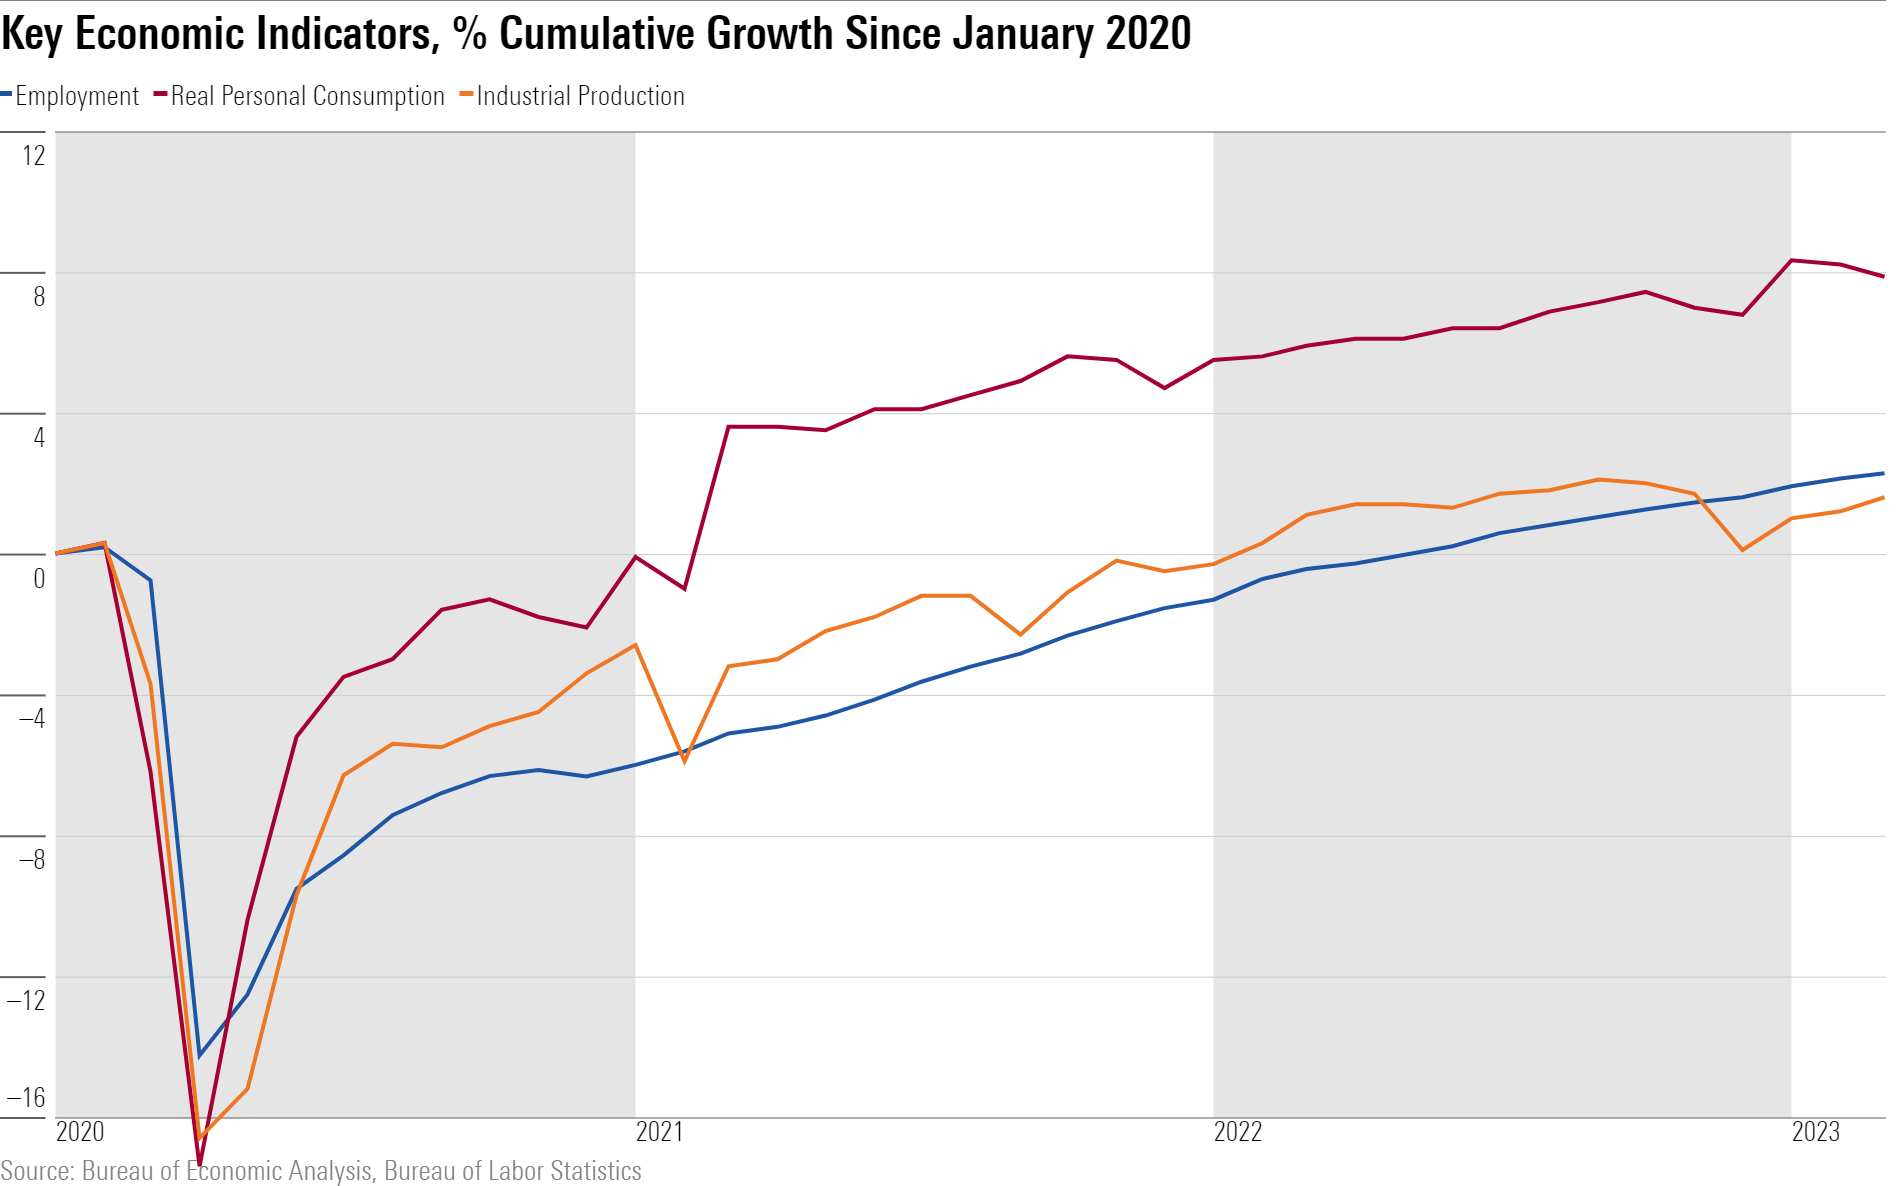 A line chart showing cumulative percentage growth since January 2020 in U.S. employment, real consumption, and industrial production.